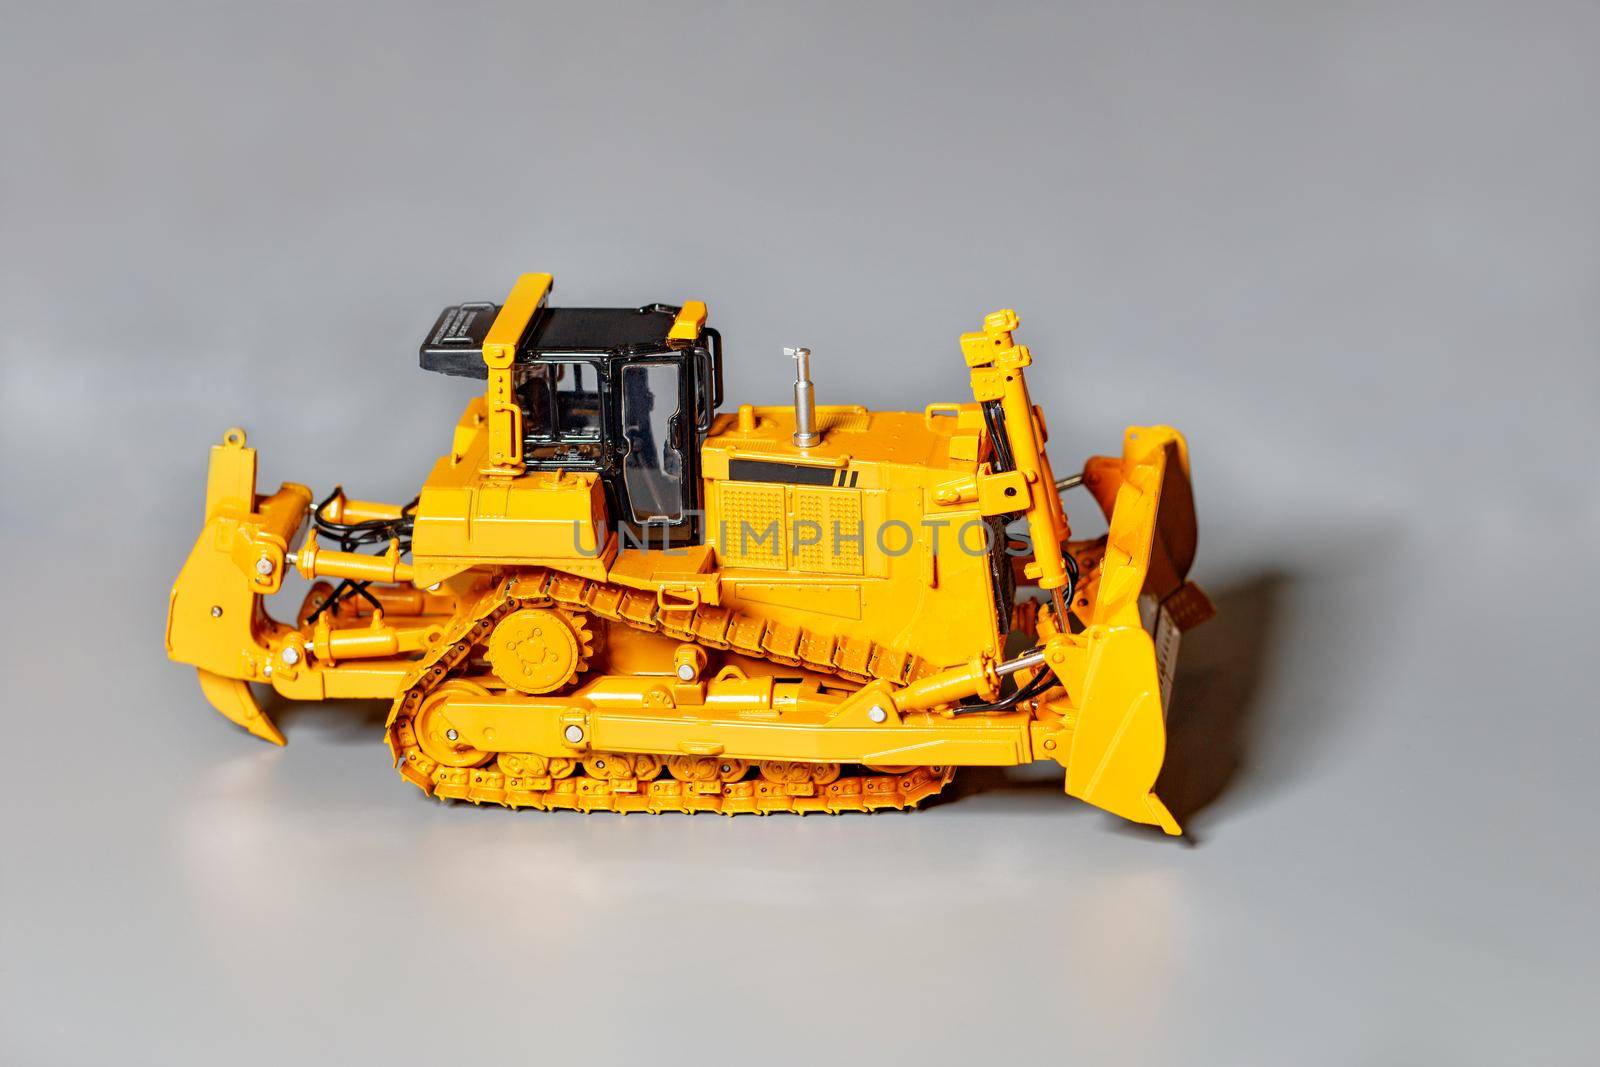 Toy model of a yellow color bulldozer on a light gray background, selective focus, copy space.